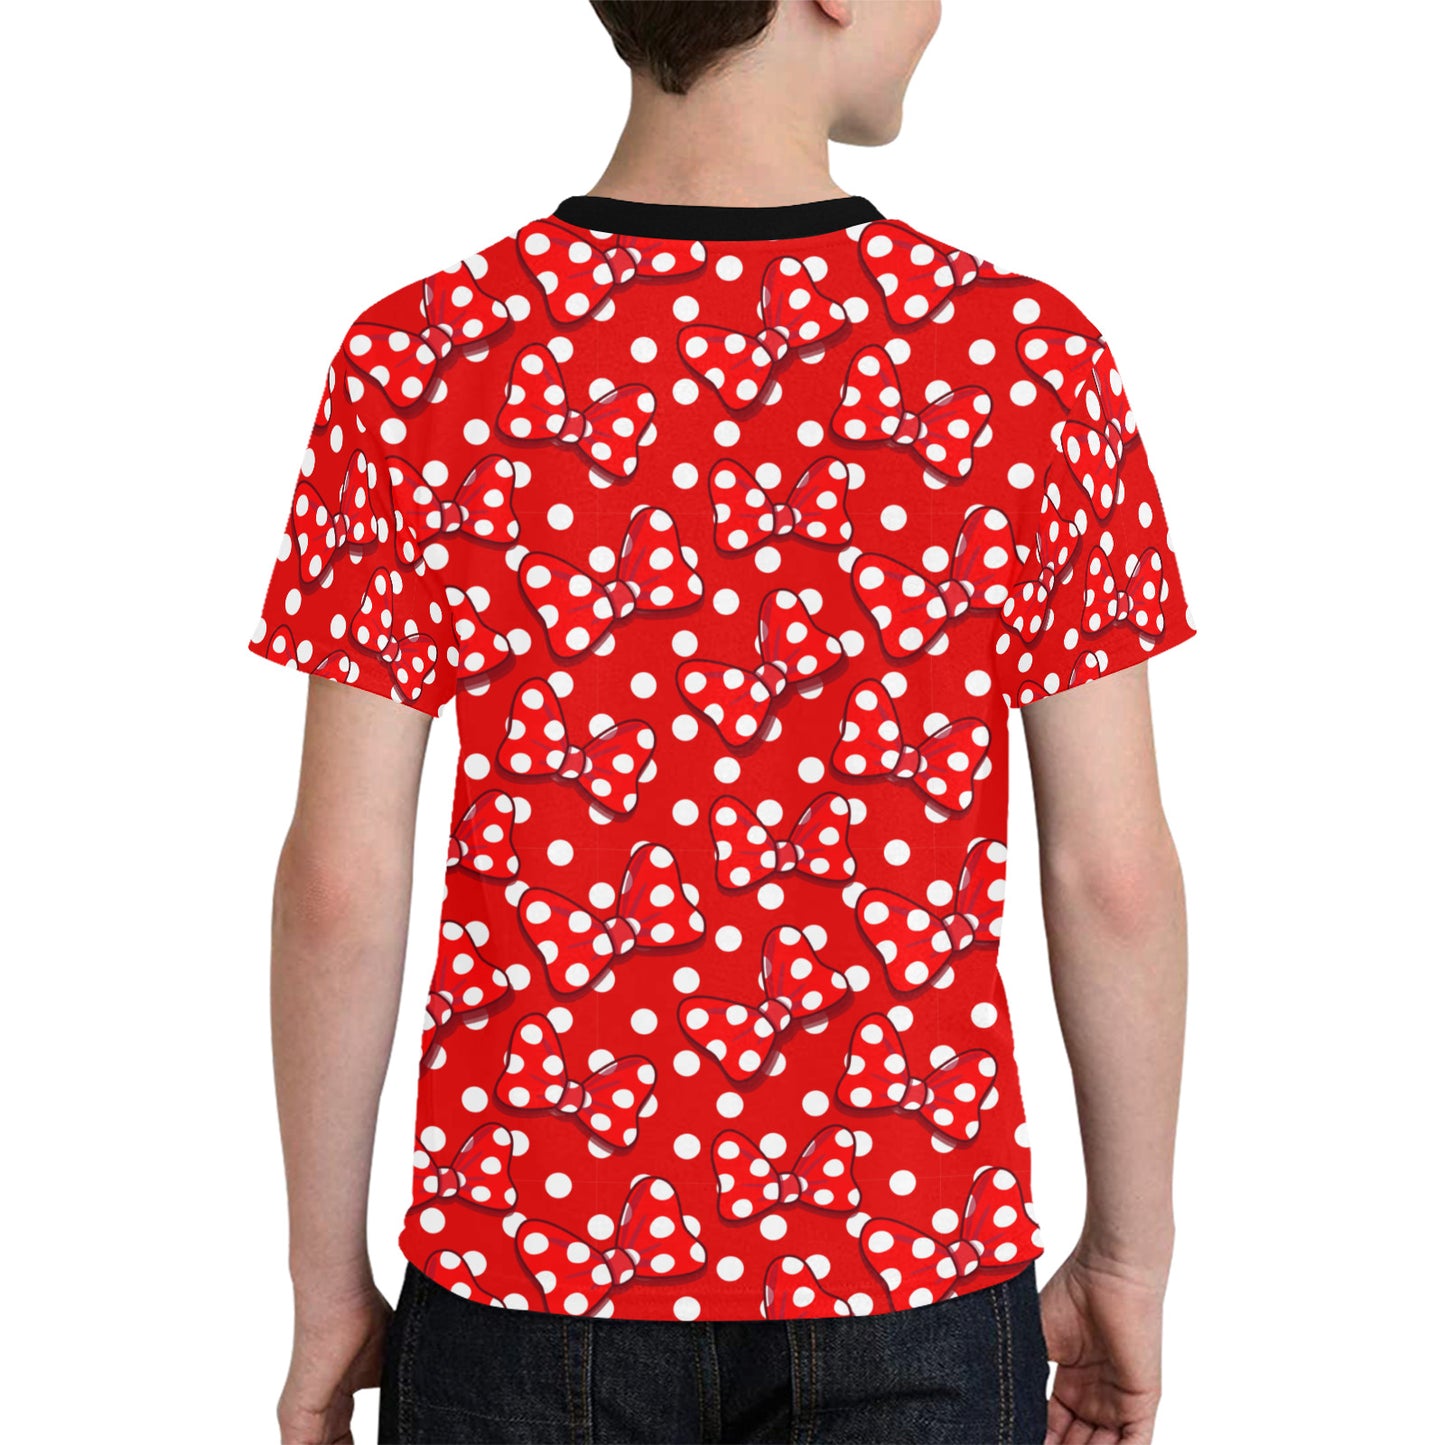 Polka Dot With Red Bows Kids' T-shirt